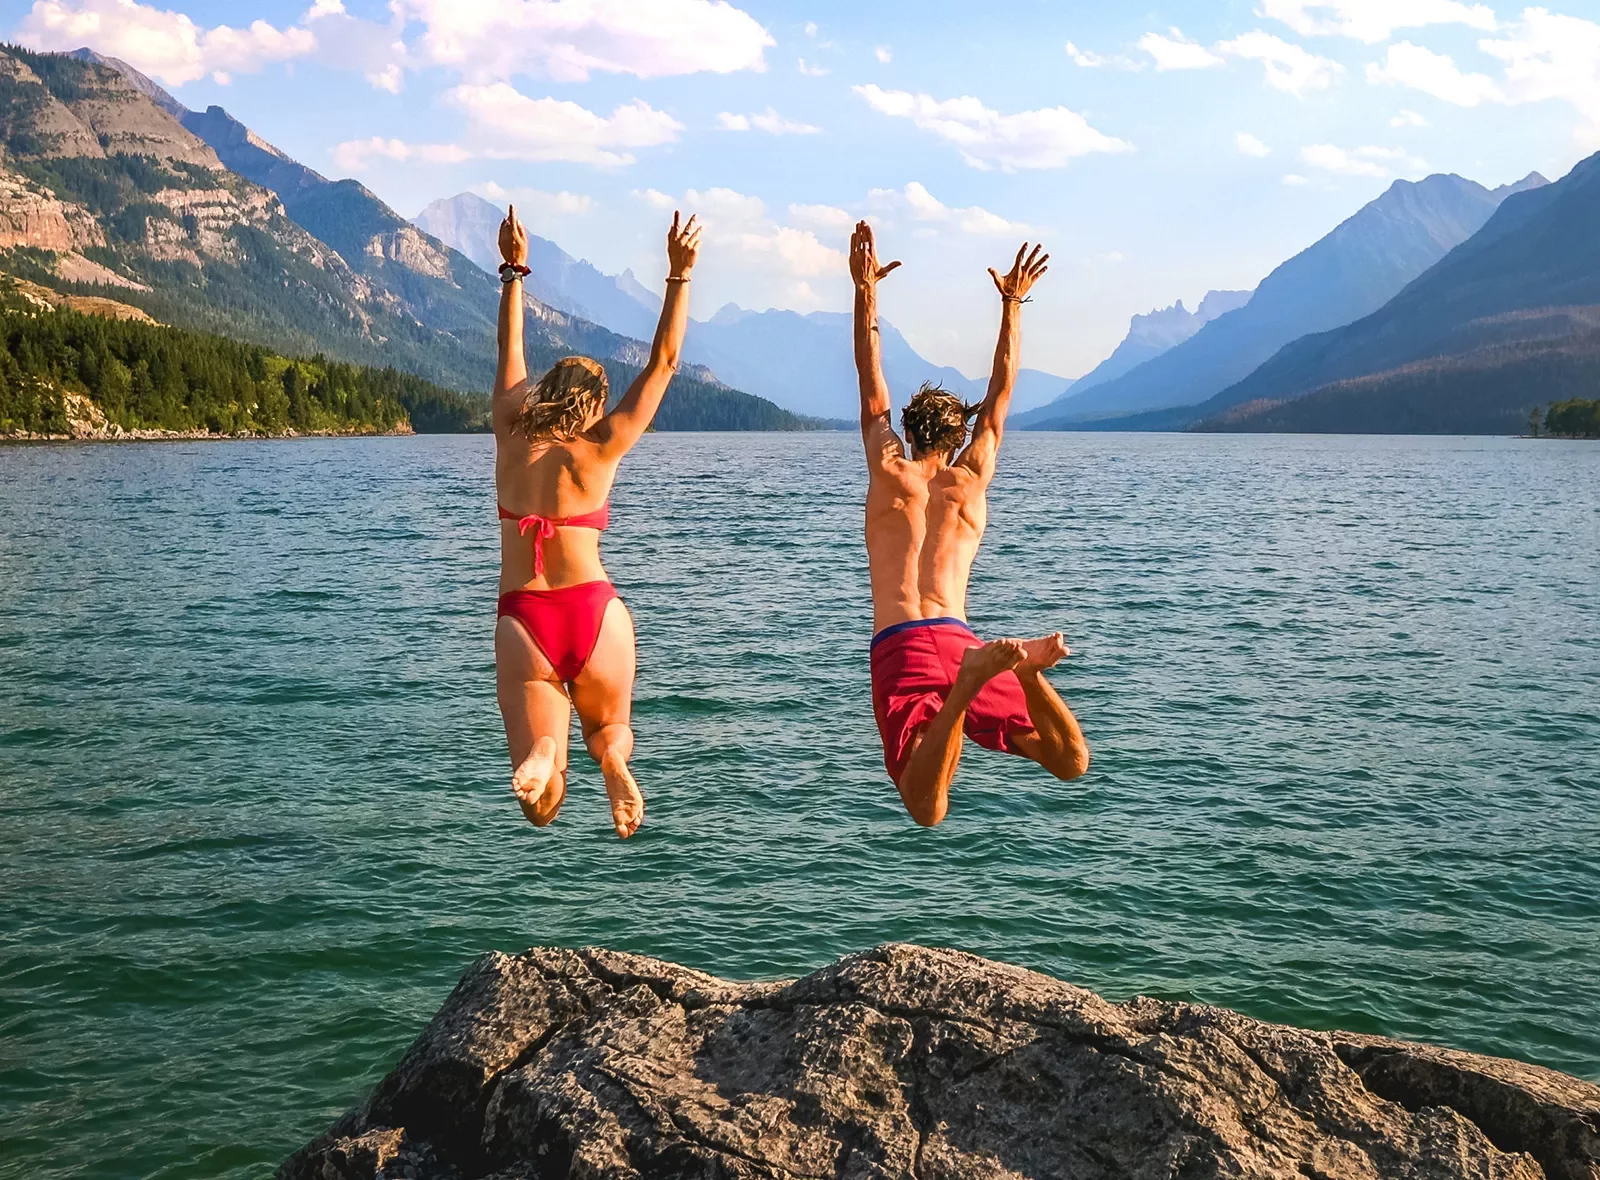 Backroads guests rock jumping into blue water